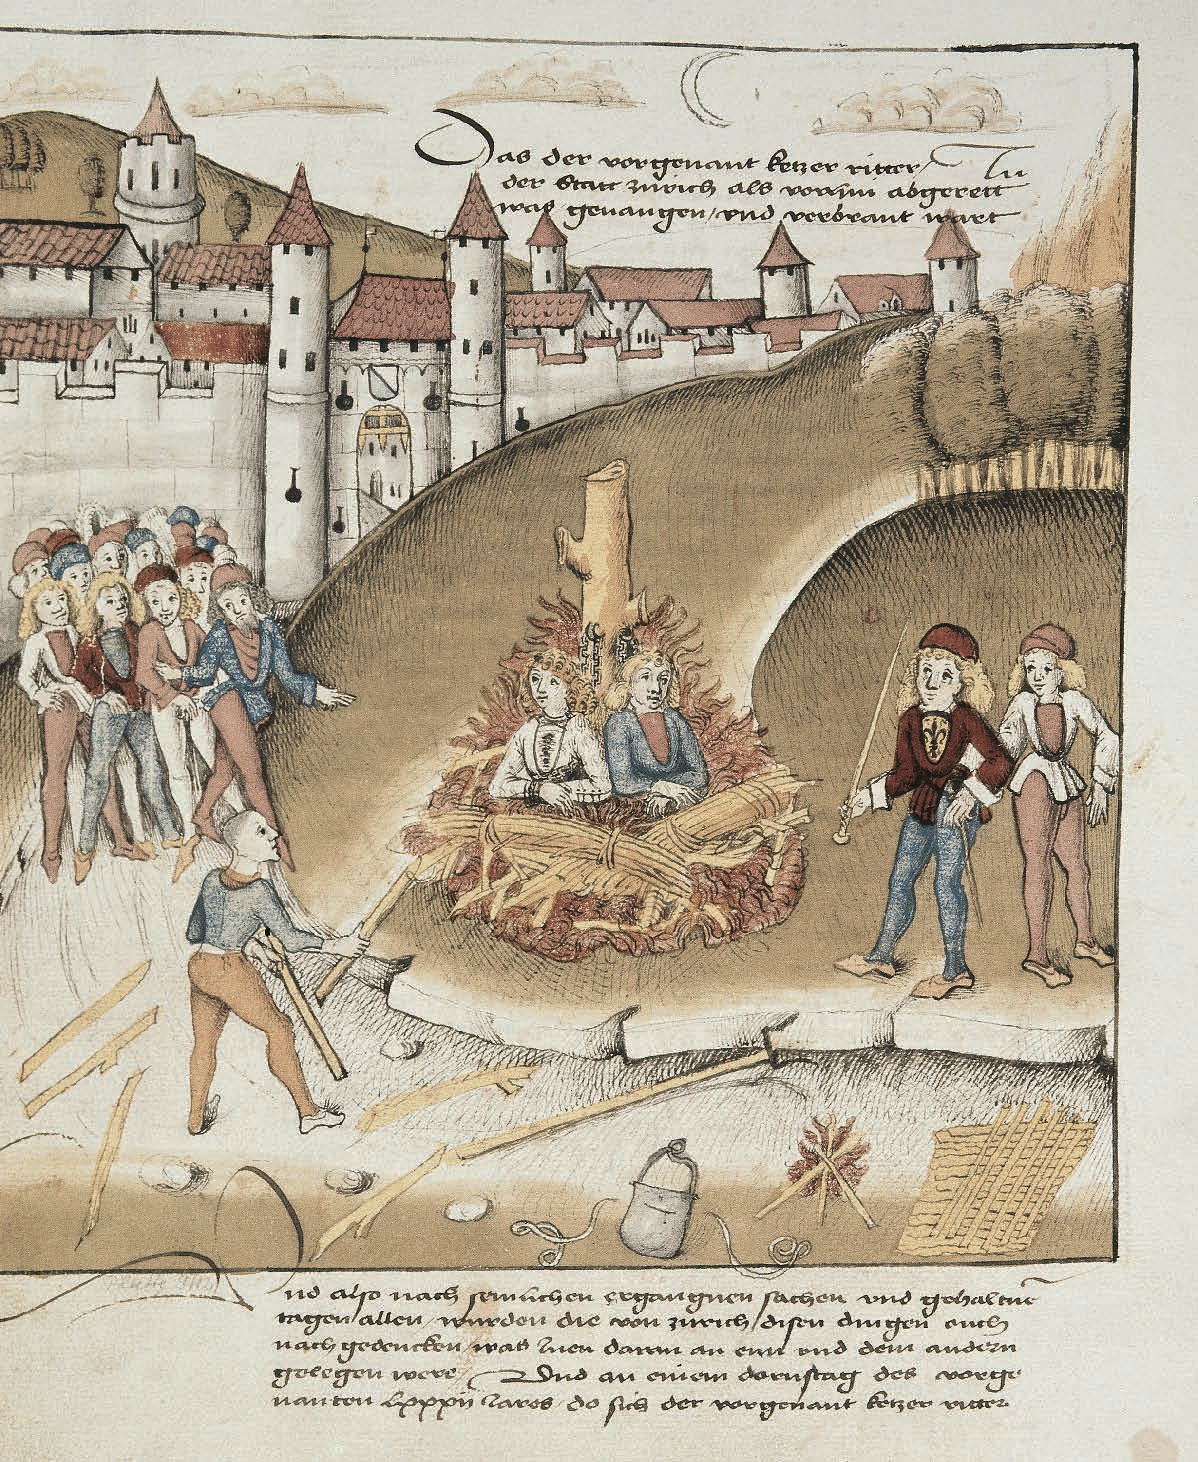 Colour image from a medieval manuscript showing the knight Richard Puller von Hohenburg and his servant being burnt outside the walls of Zürich, for sodomy in 1482. There are a crowd of onlookers and a man throwing more sticks onto the pyre. 